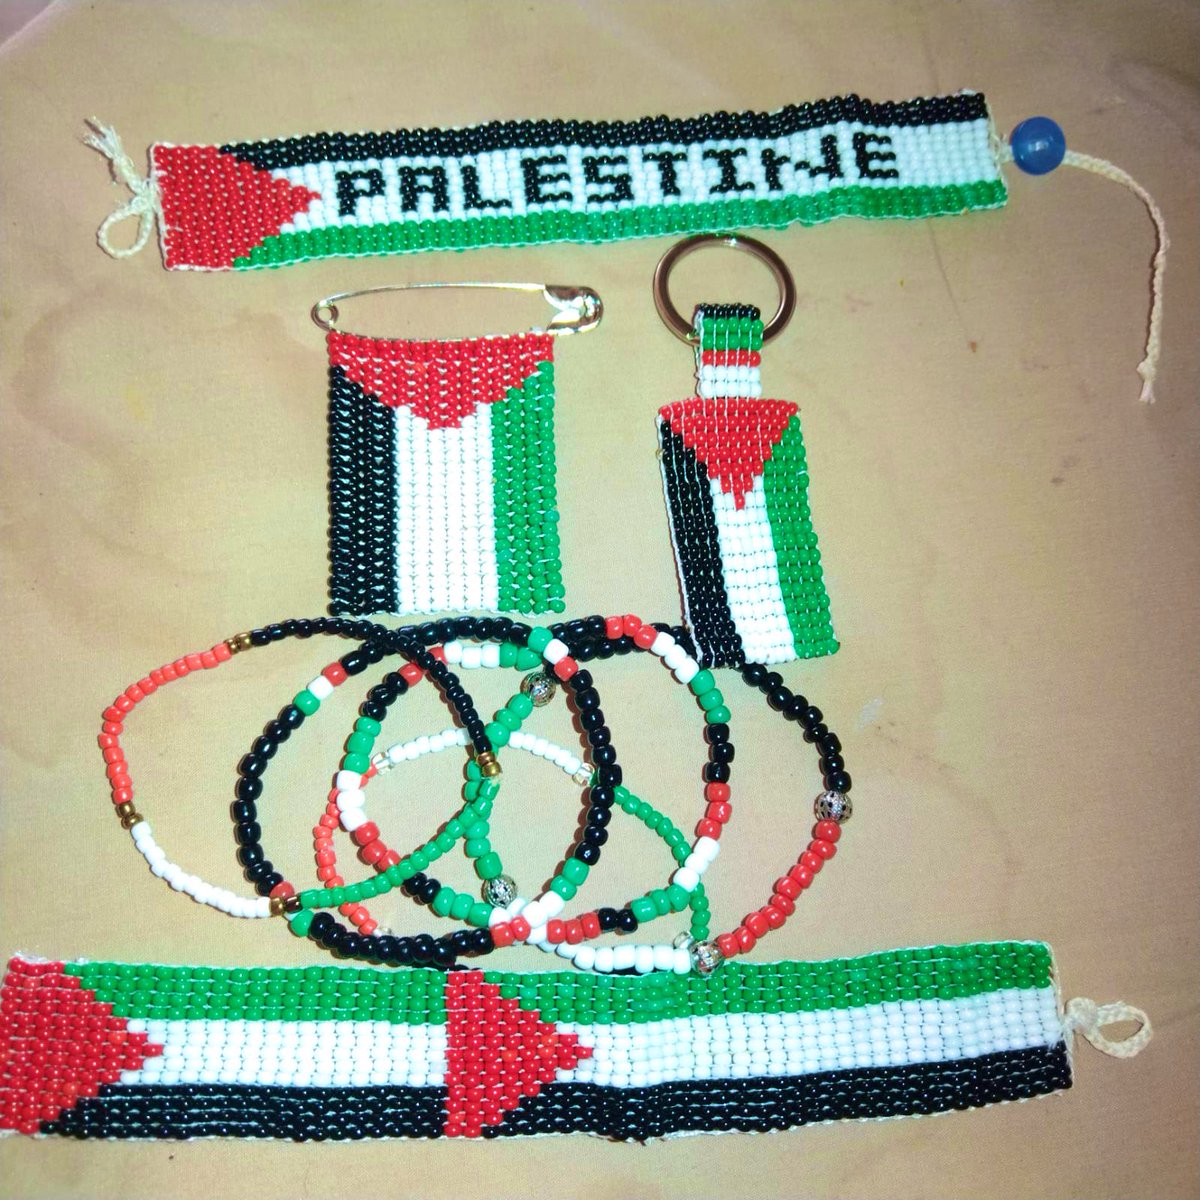 I asked an entrepreneur in Khayelitsha to create some beadwork for me… I’m awaiting pricing, and am happy to take orders for her and help with delivery. For now, there’s no online shop, but that will come… 🇵🇸❤️🇵🇸❤️🇵🇸❤️🇵🇸